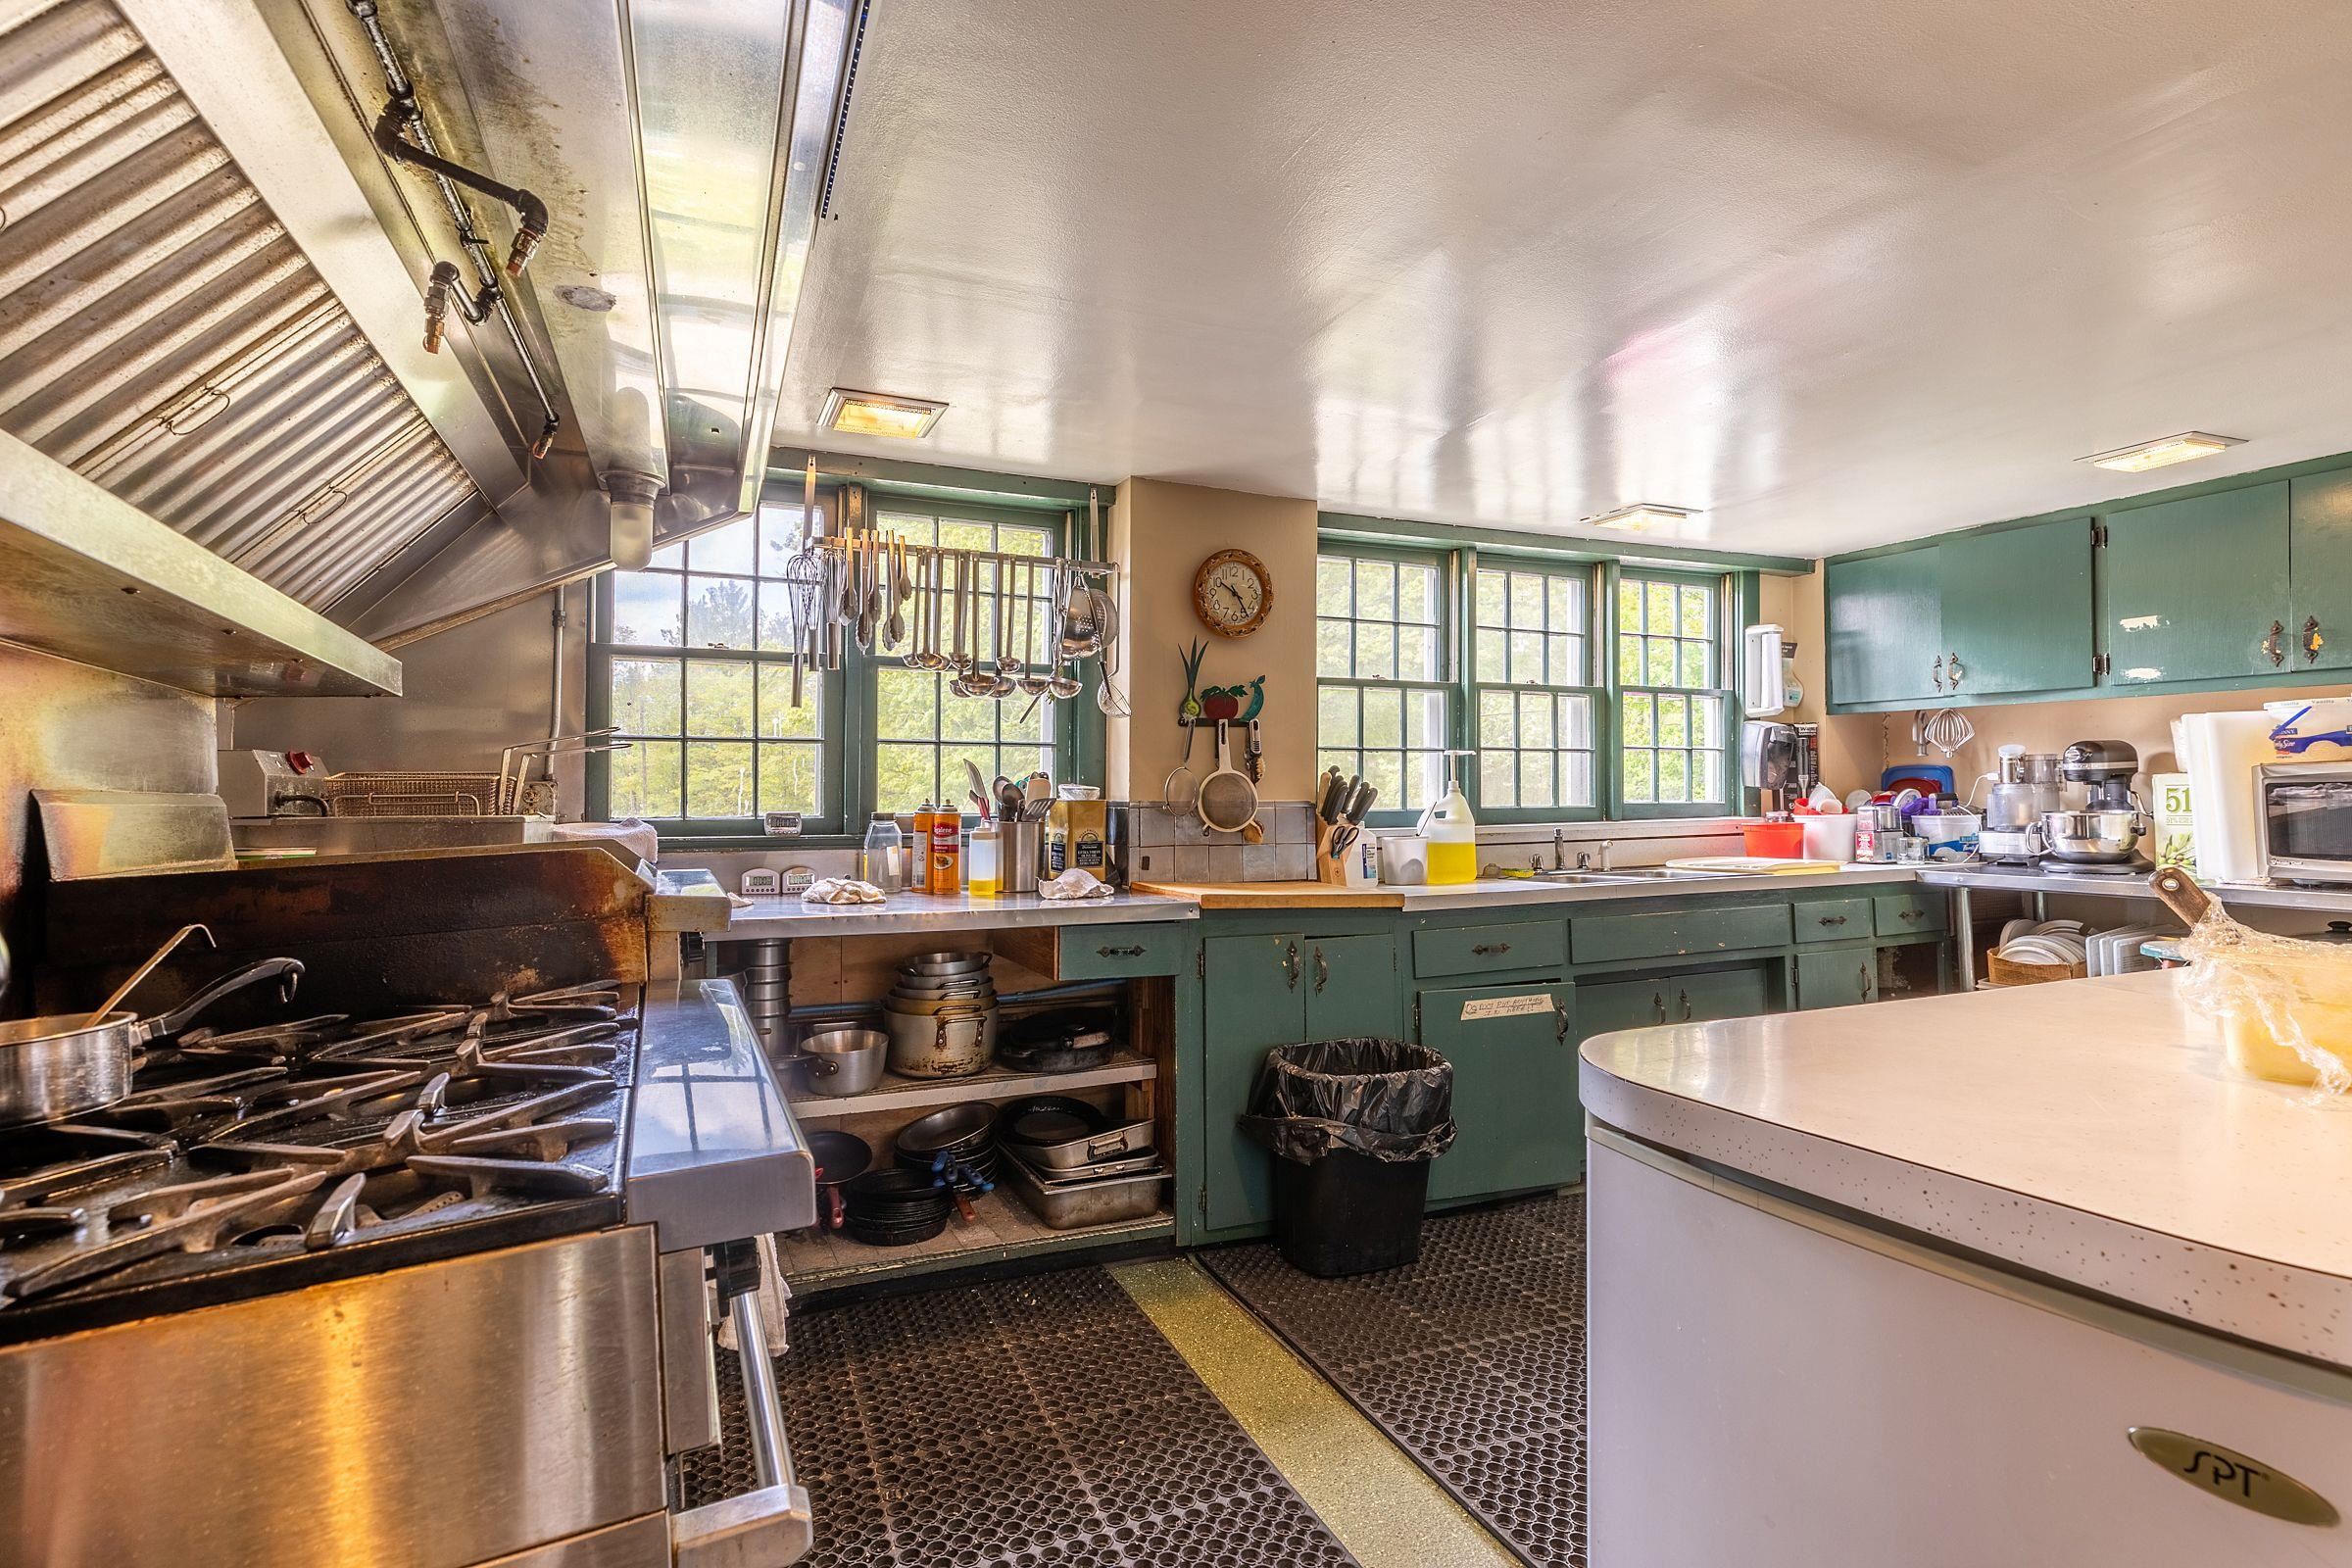 Full-service kitchen with a flair